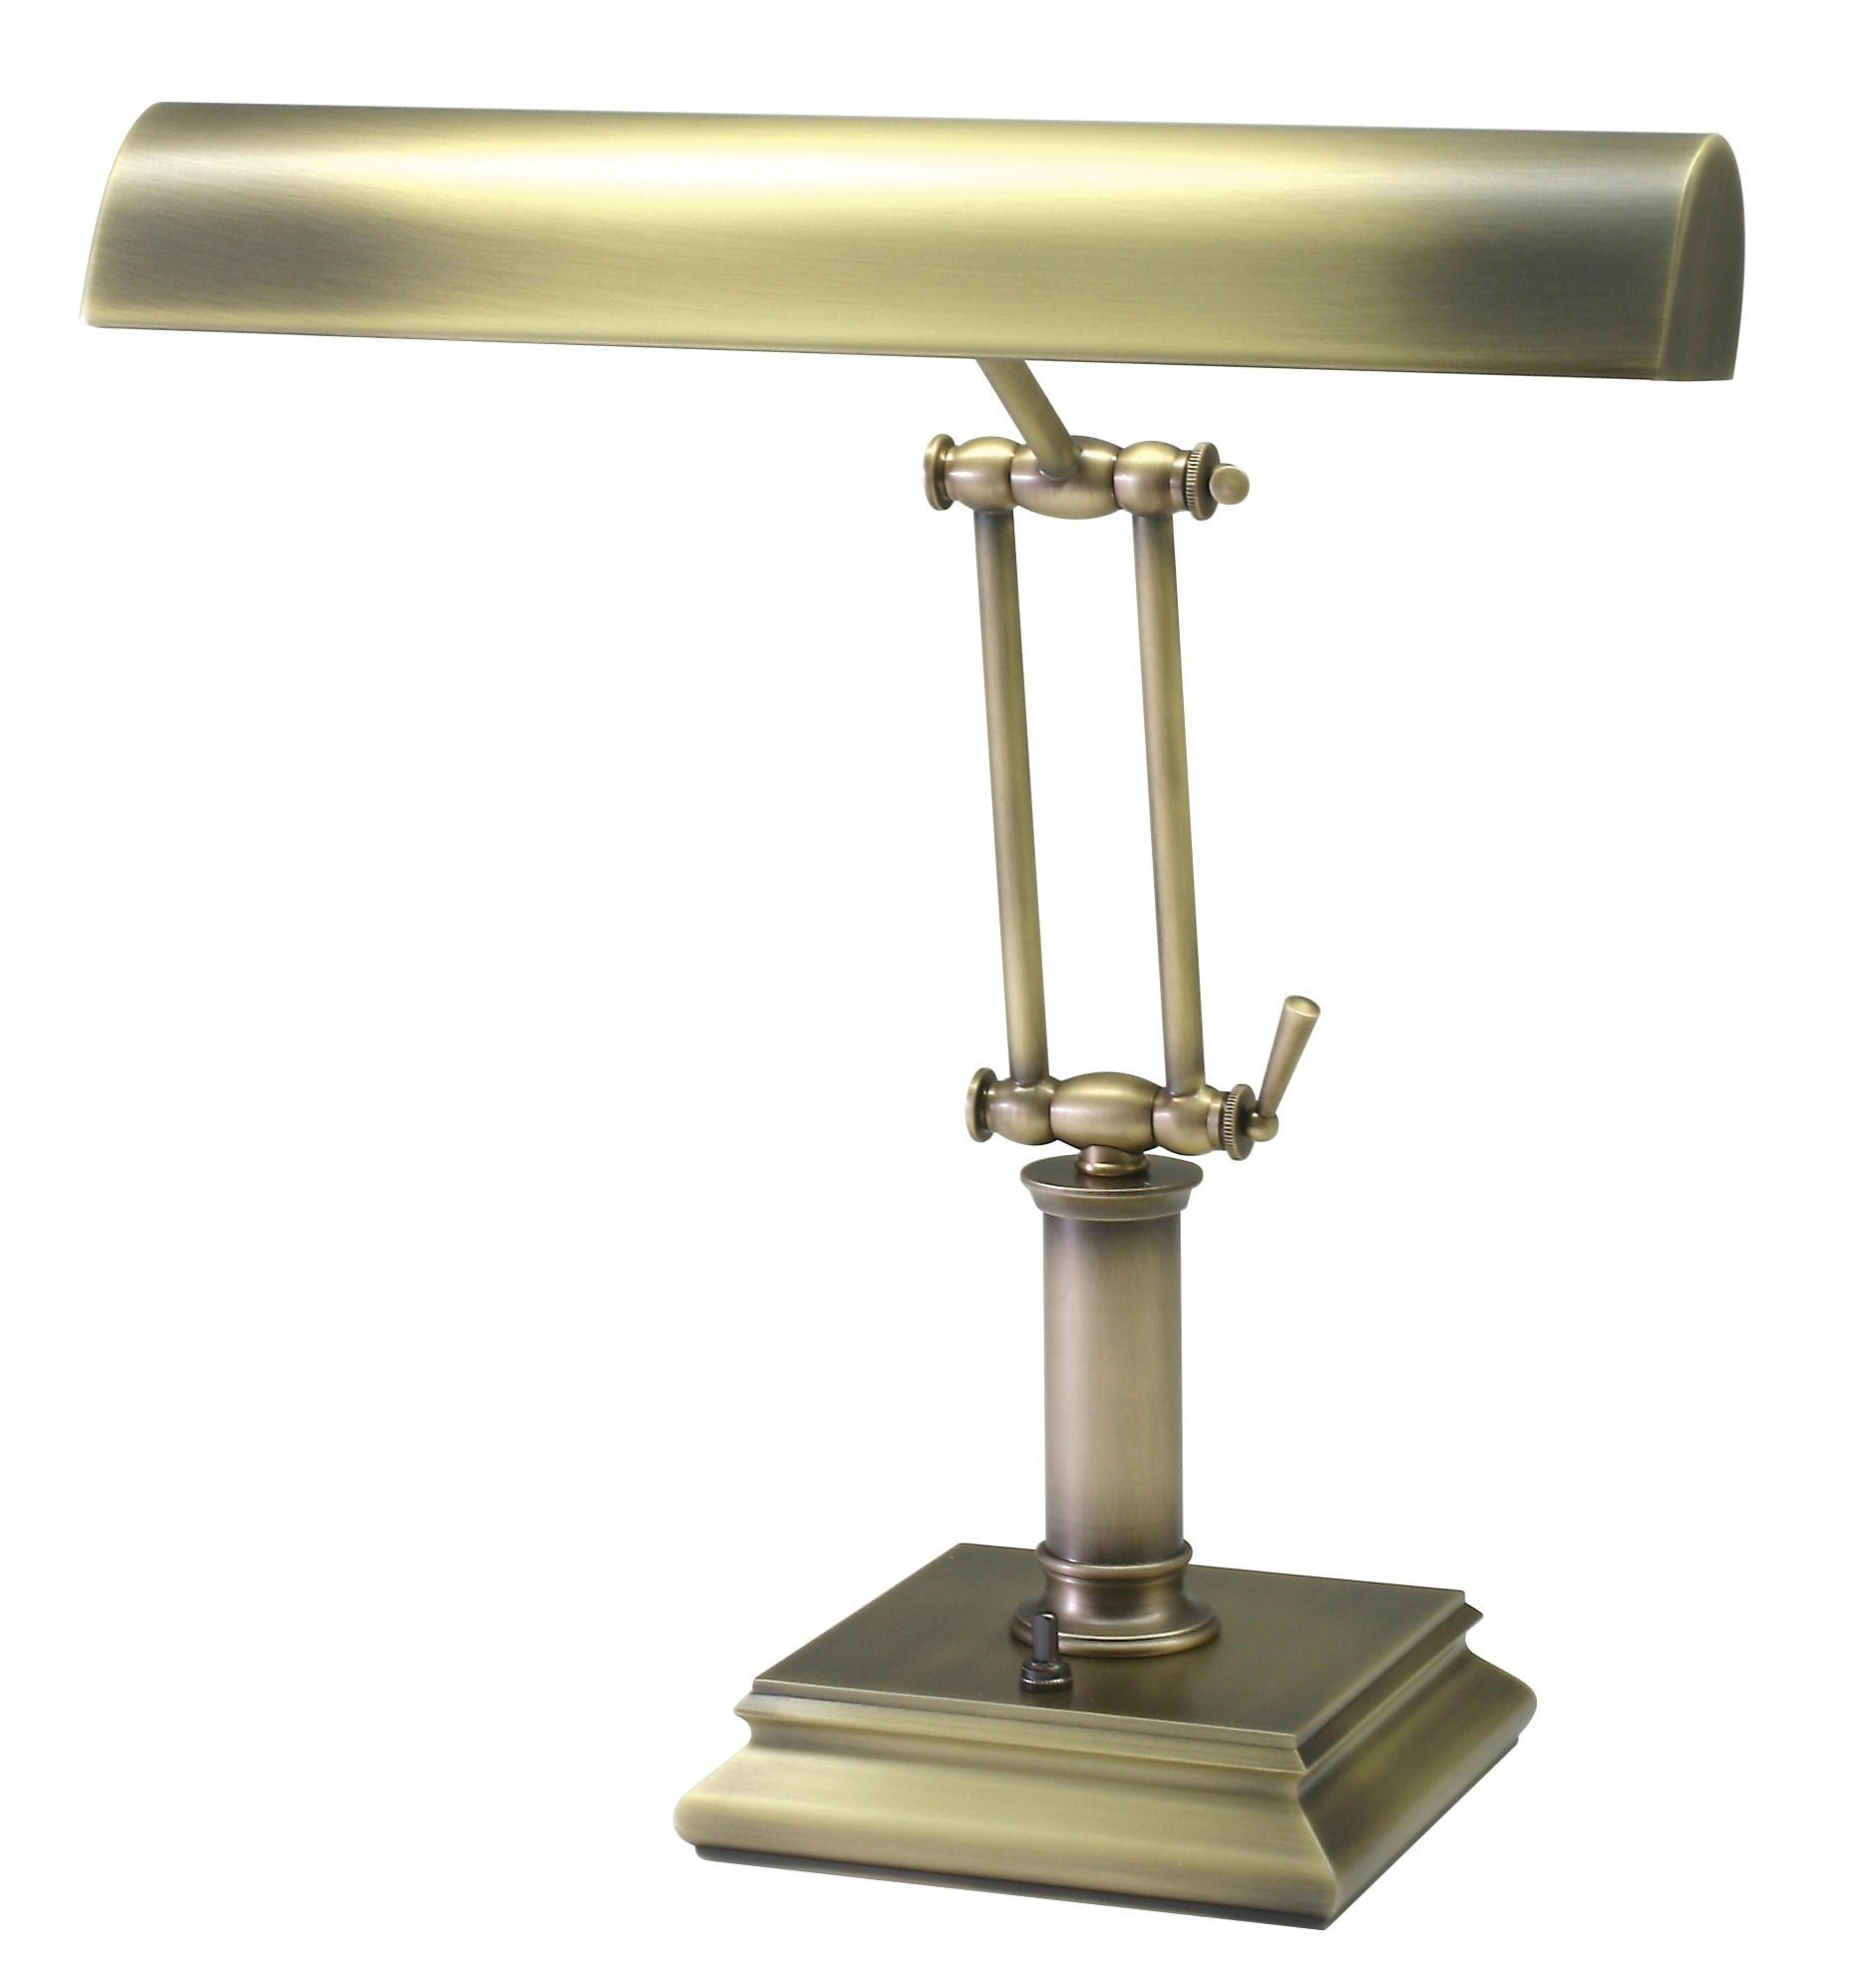 House of Troy Desk Piano Lamp 14" Antique Brass P14-201-AB